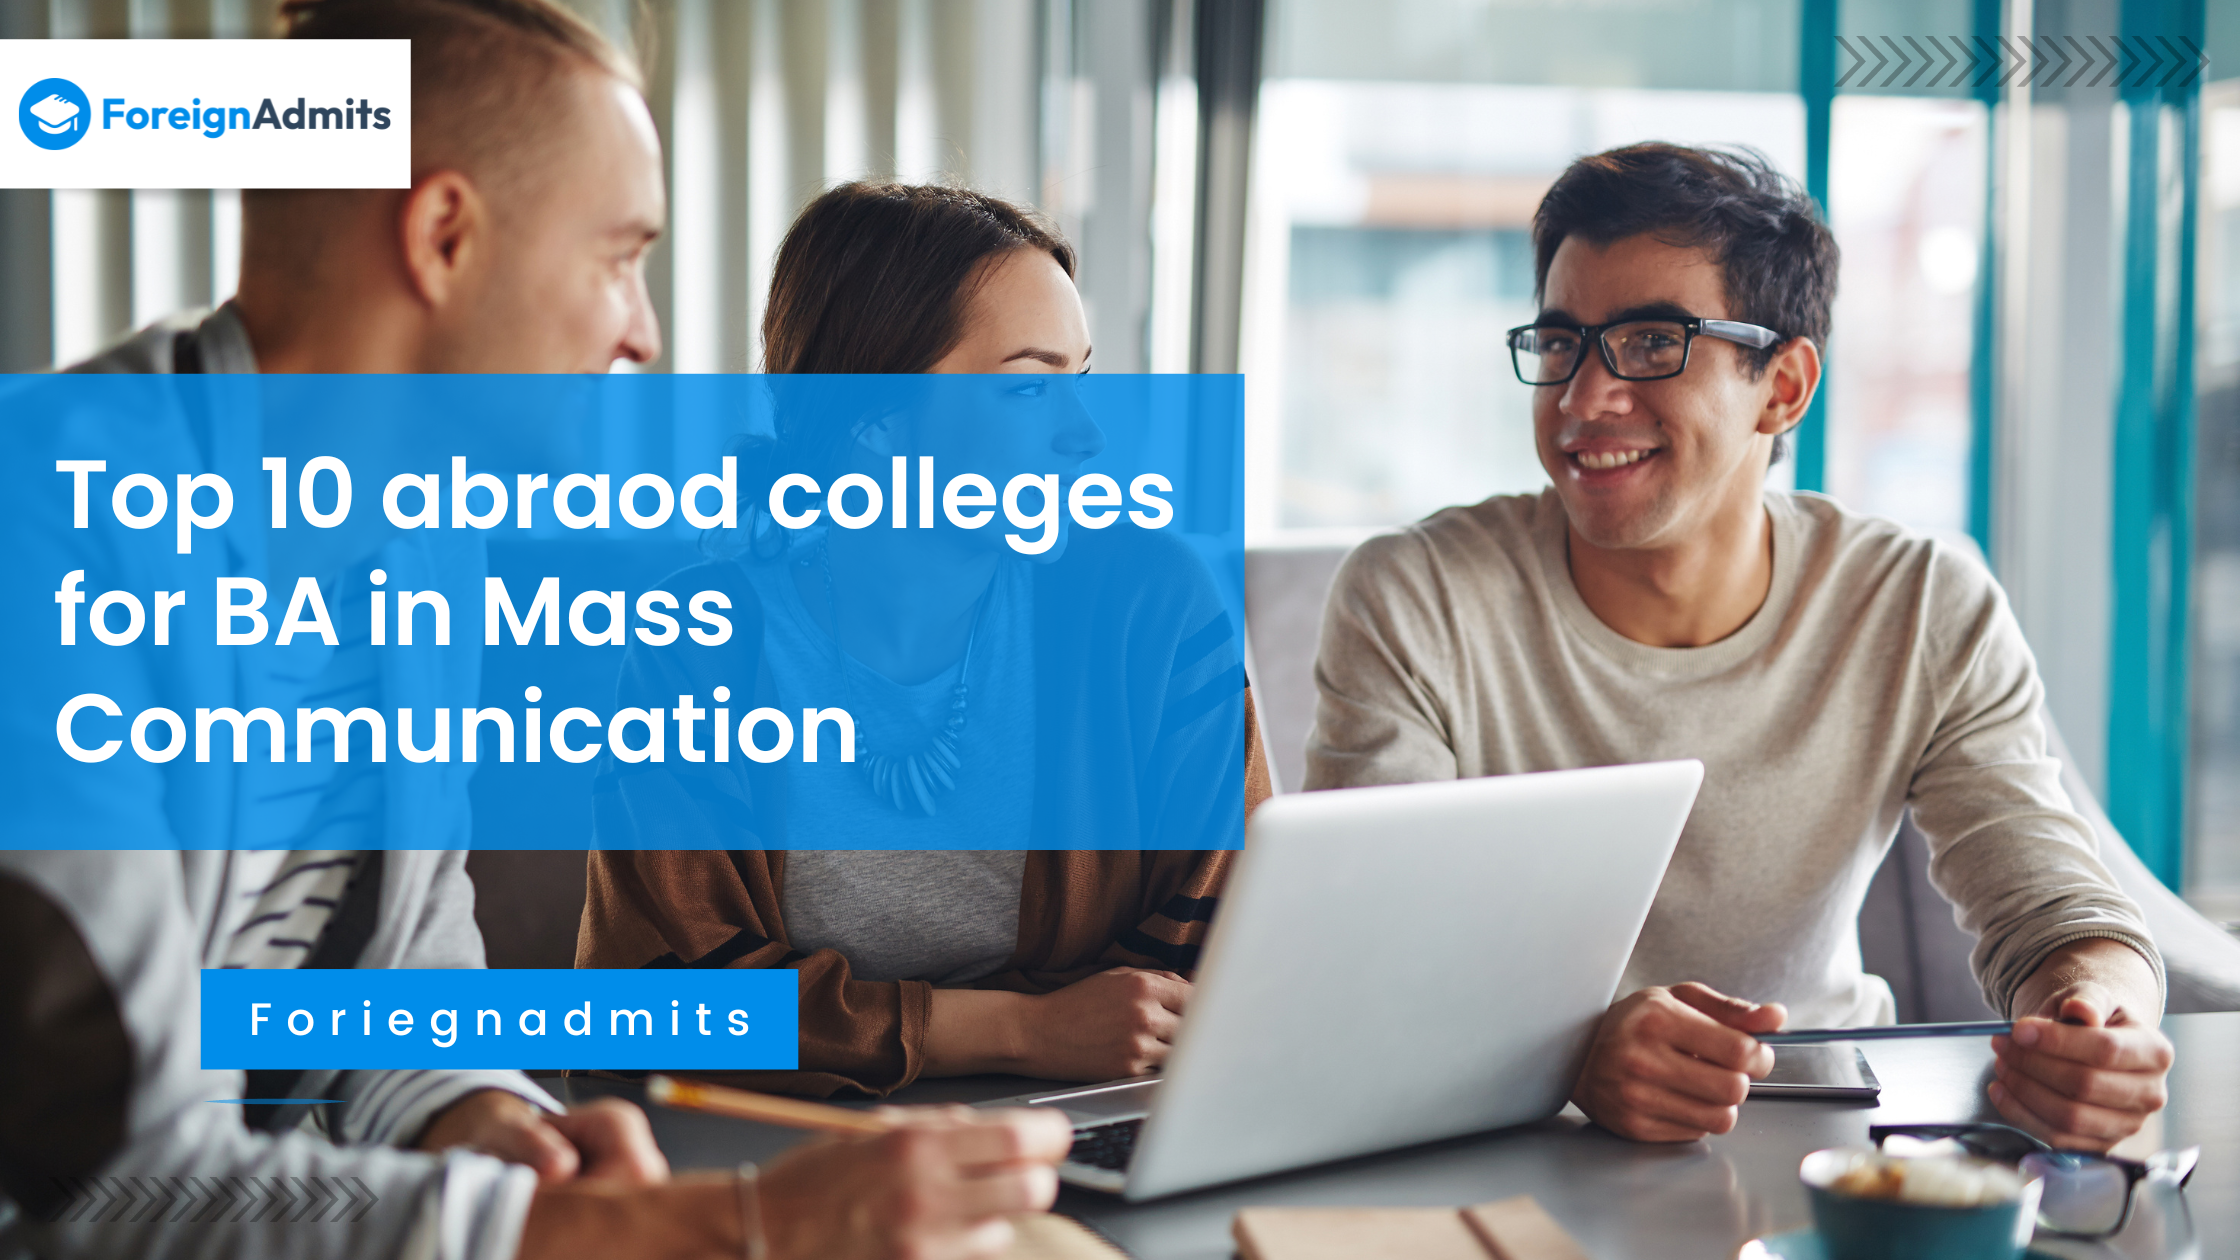 Top 10 abroad colleges for BA in Mass communication.